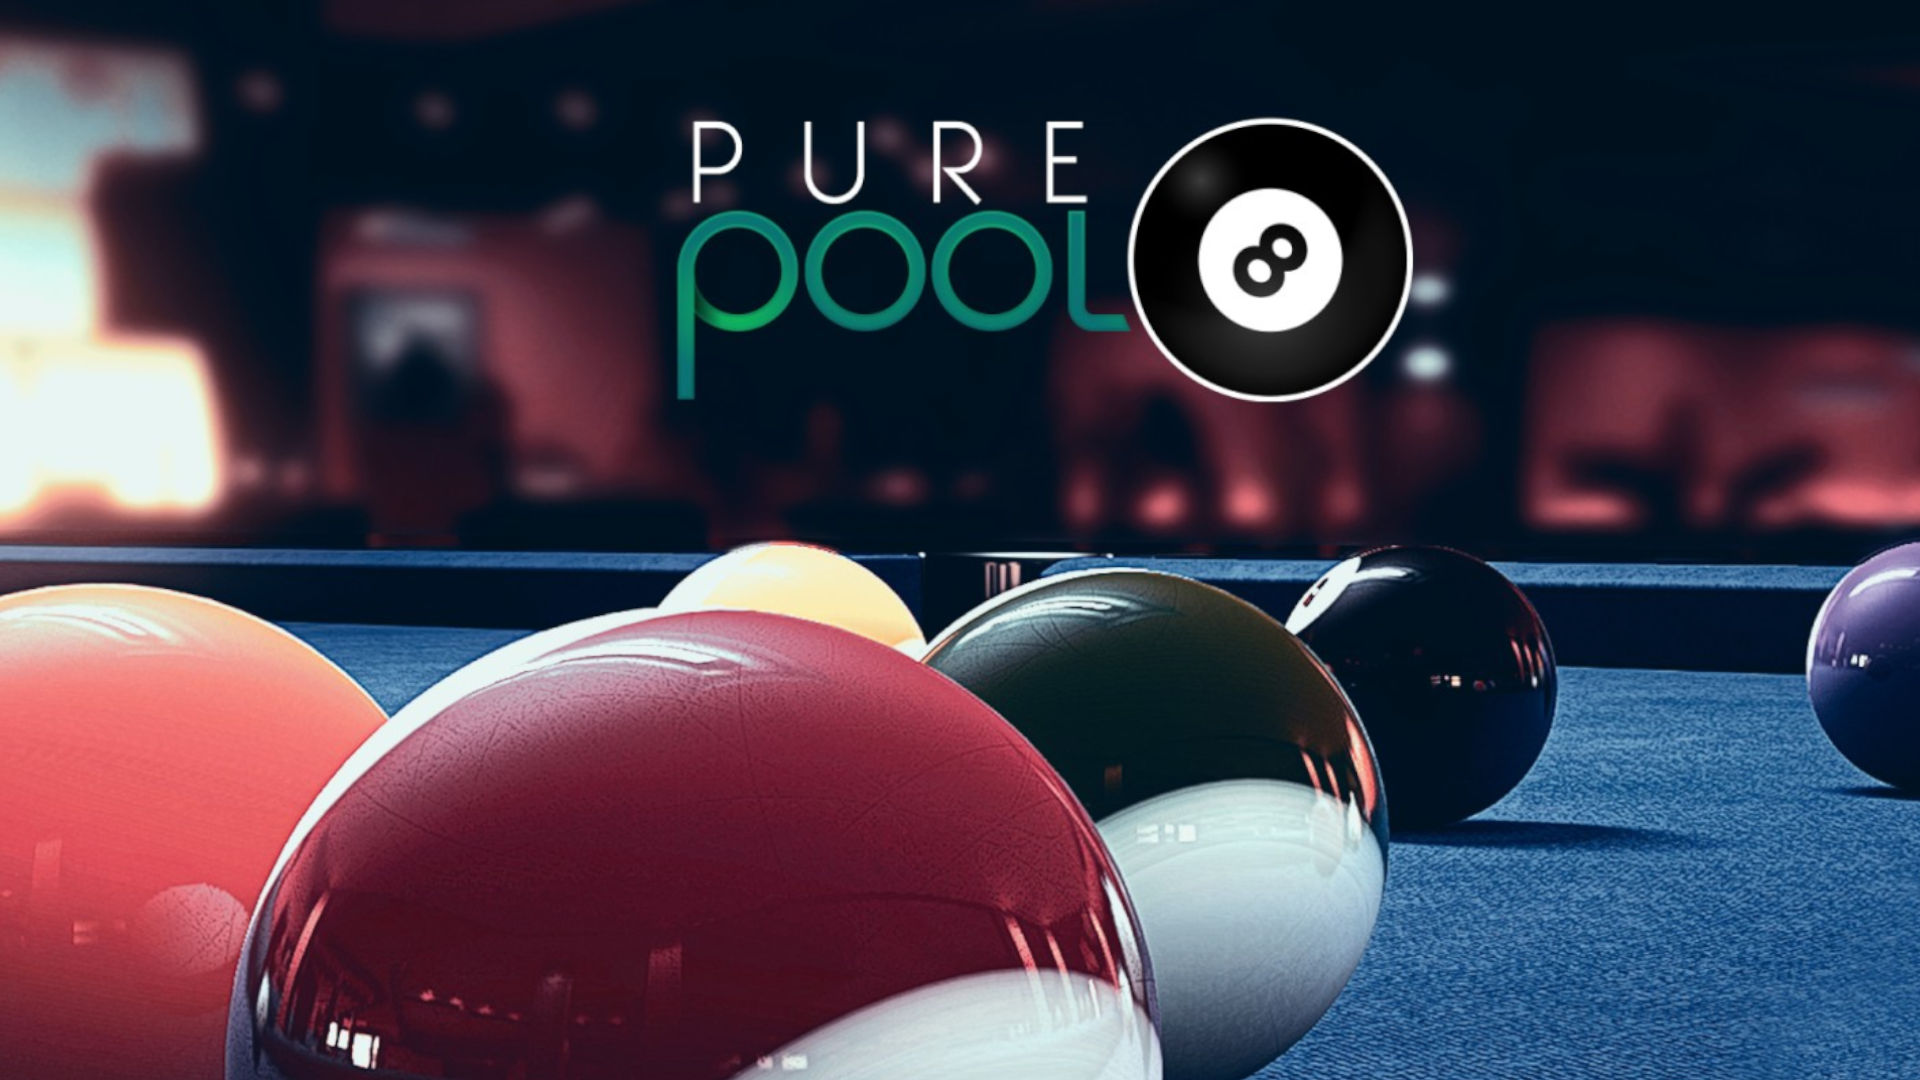 Cover art for Pure Pool, one of the more realistic pool sims on Switch